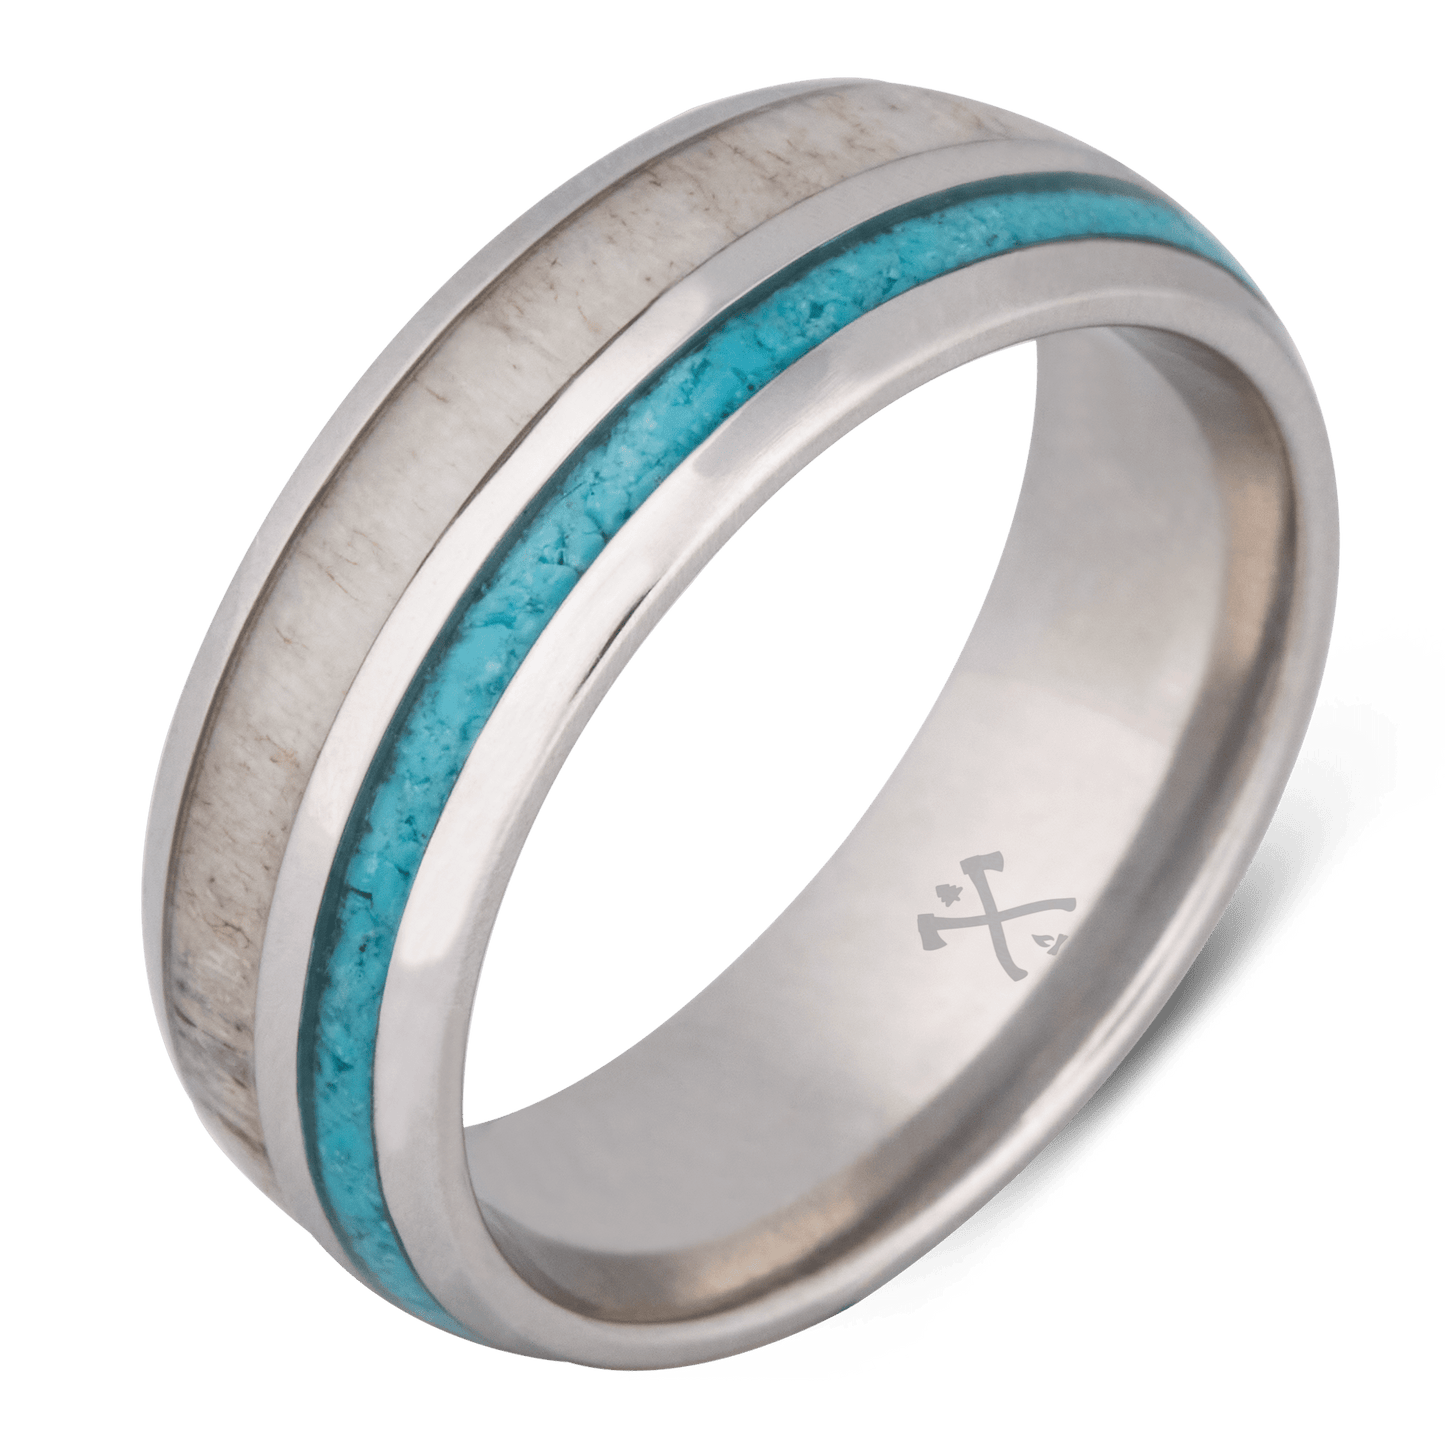 The Swimmer - Men's Wedding Rings - Manly Bands